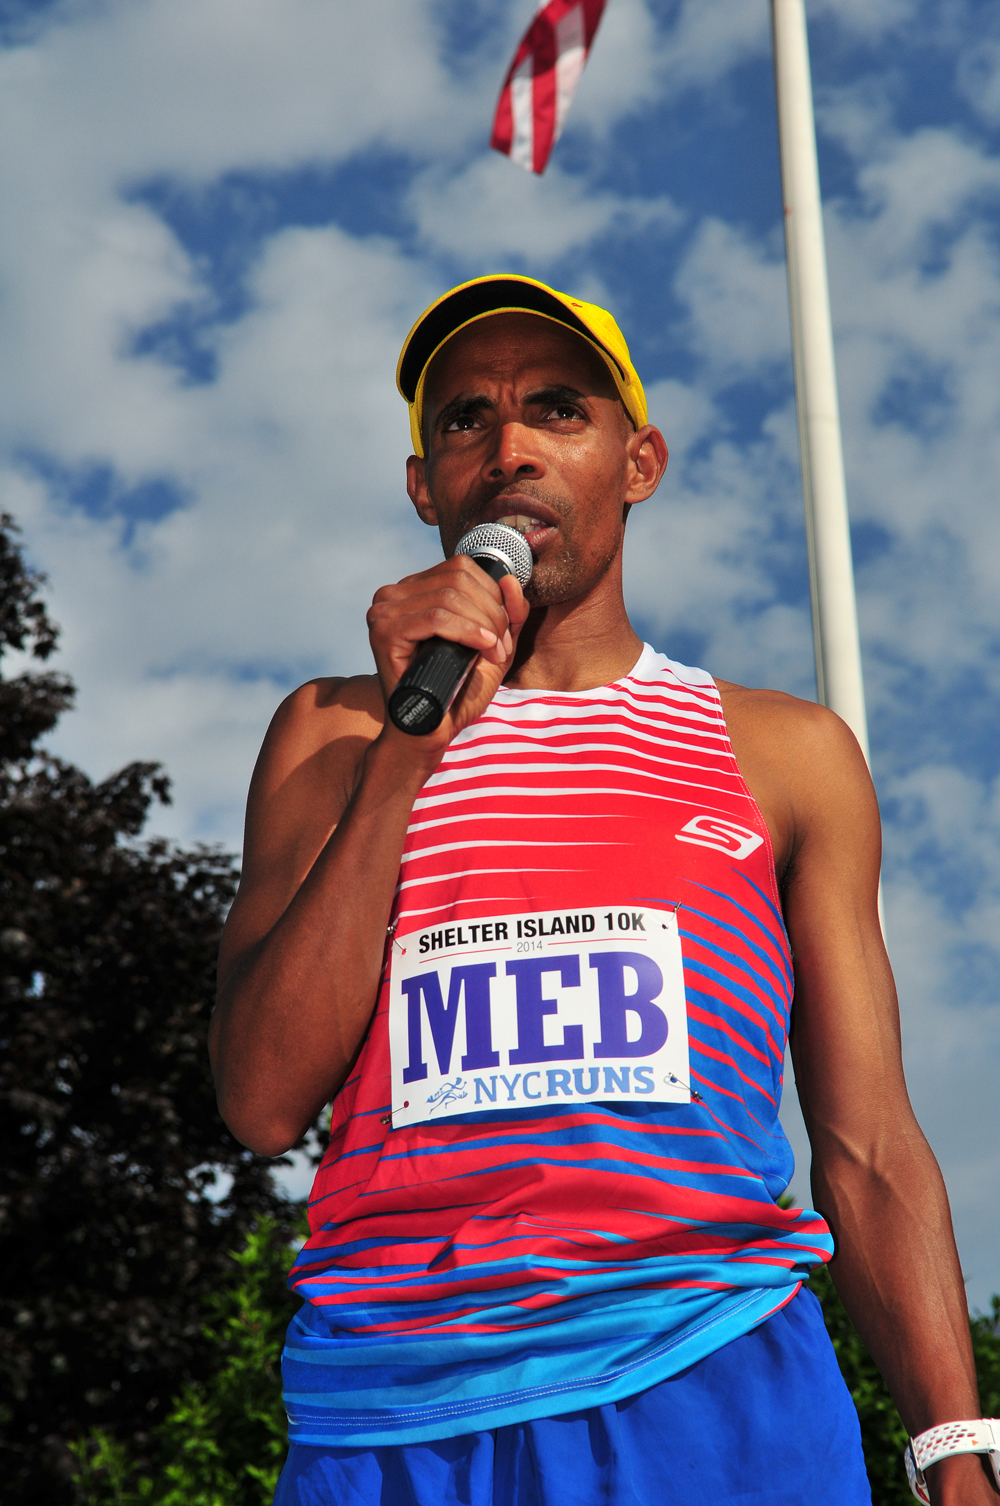 Boston Marathon winner Meb Keflezighi addressed the crowd at the start of the race. The 39-year-old lives in San Diego with his wife and three children. (Credit: Bill Landon)